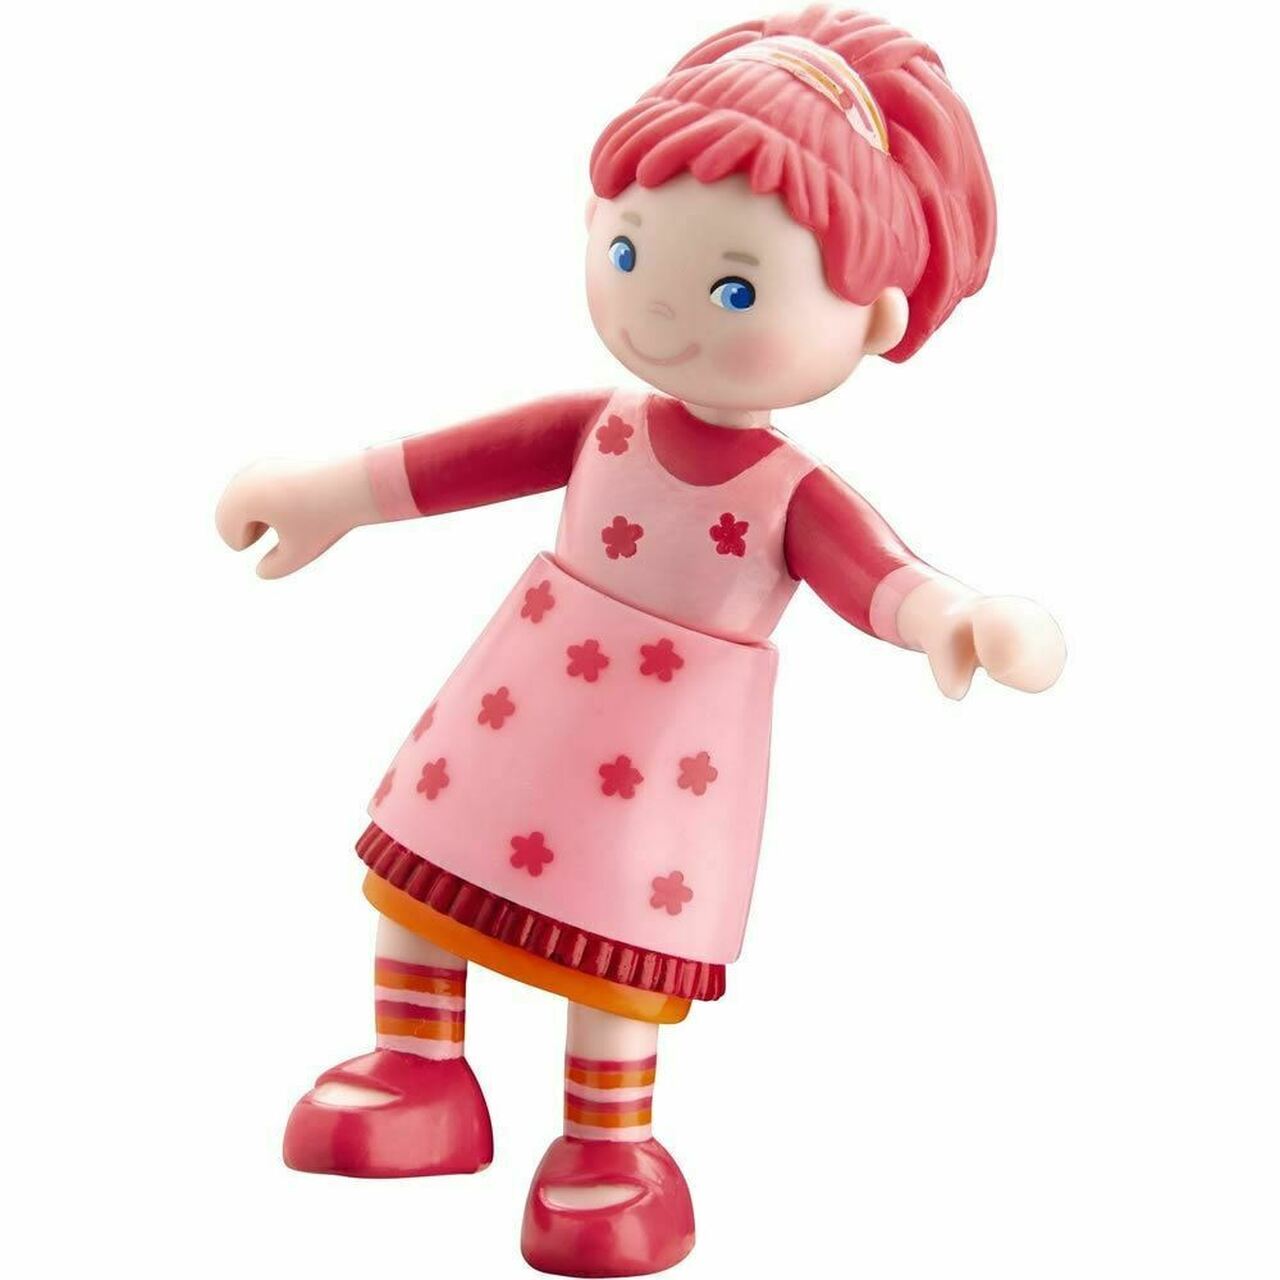 HABA Little Friends Lilli Doll with Pink Hair